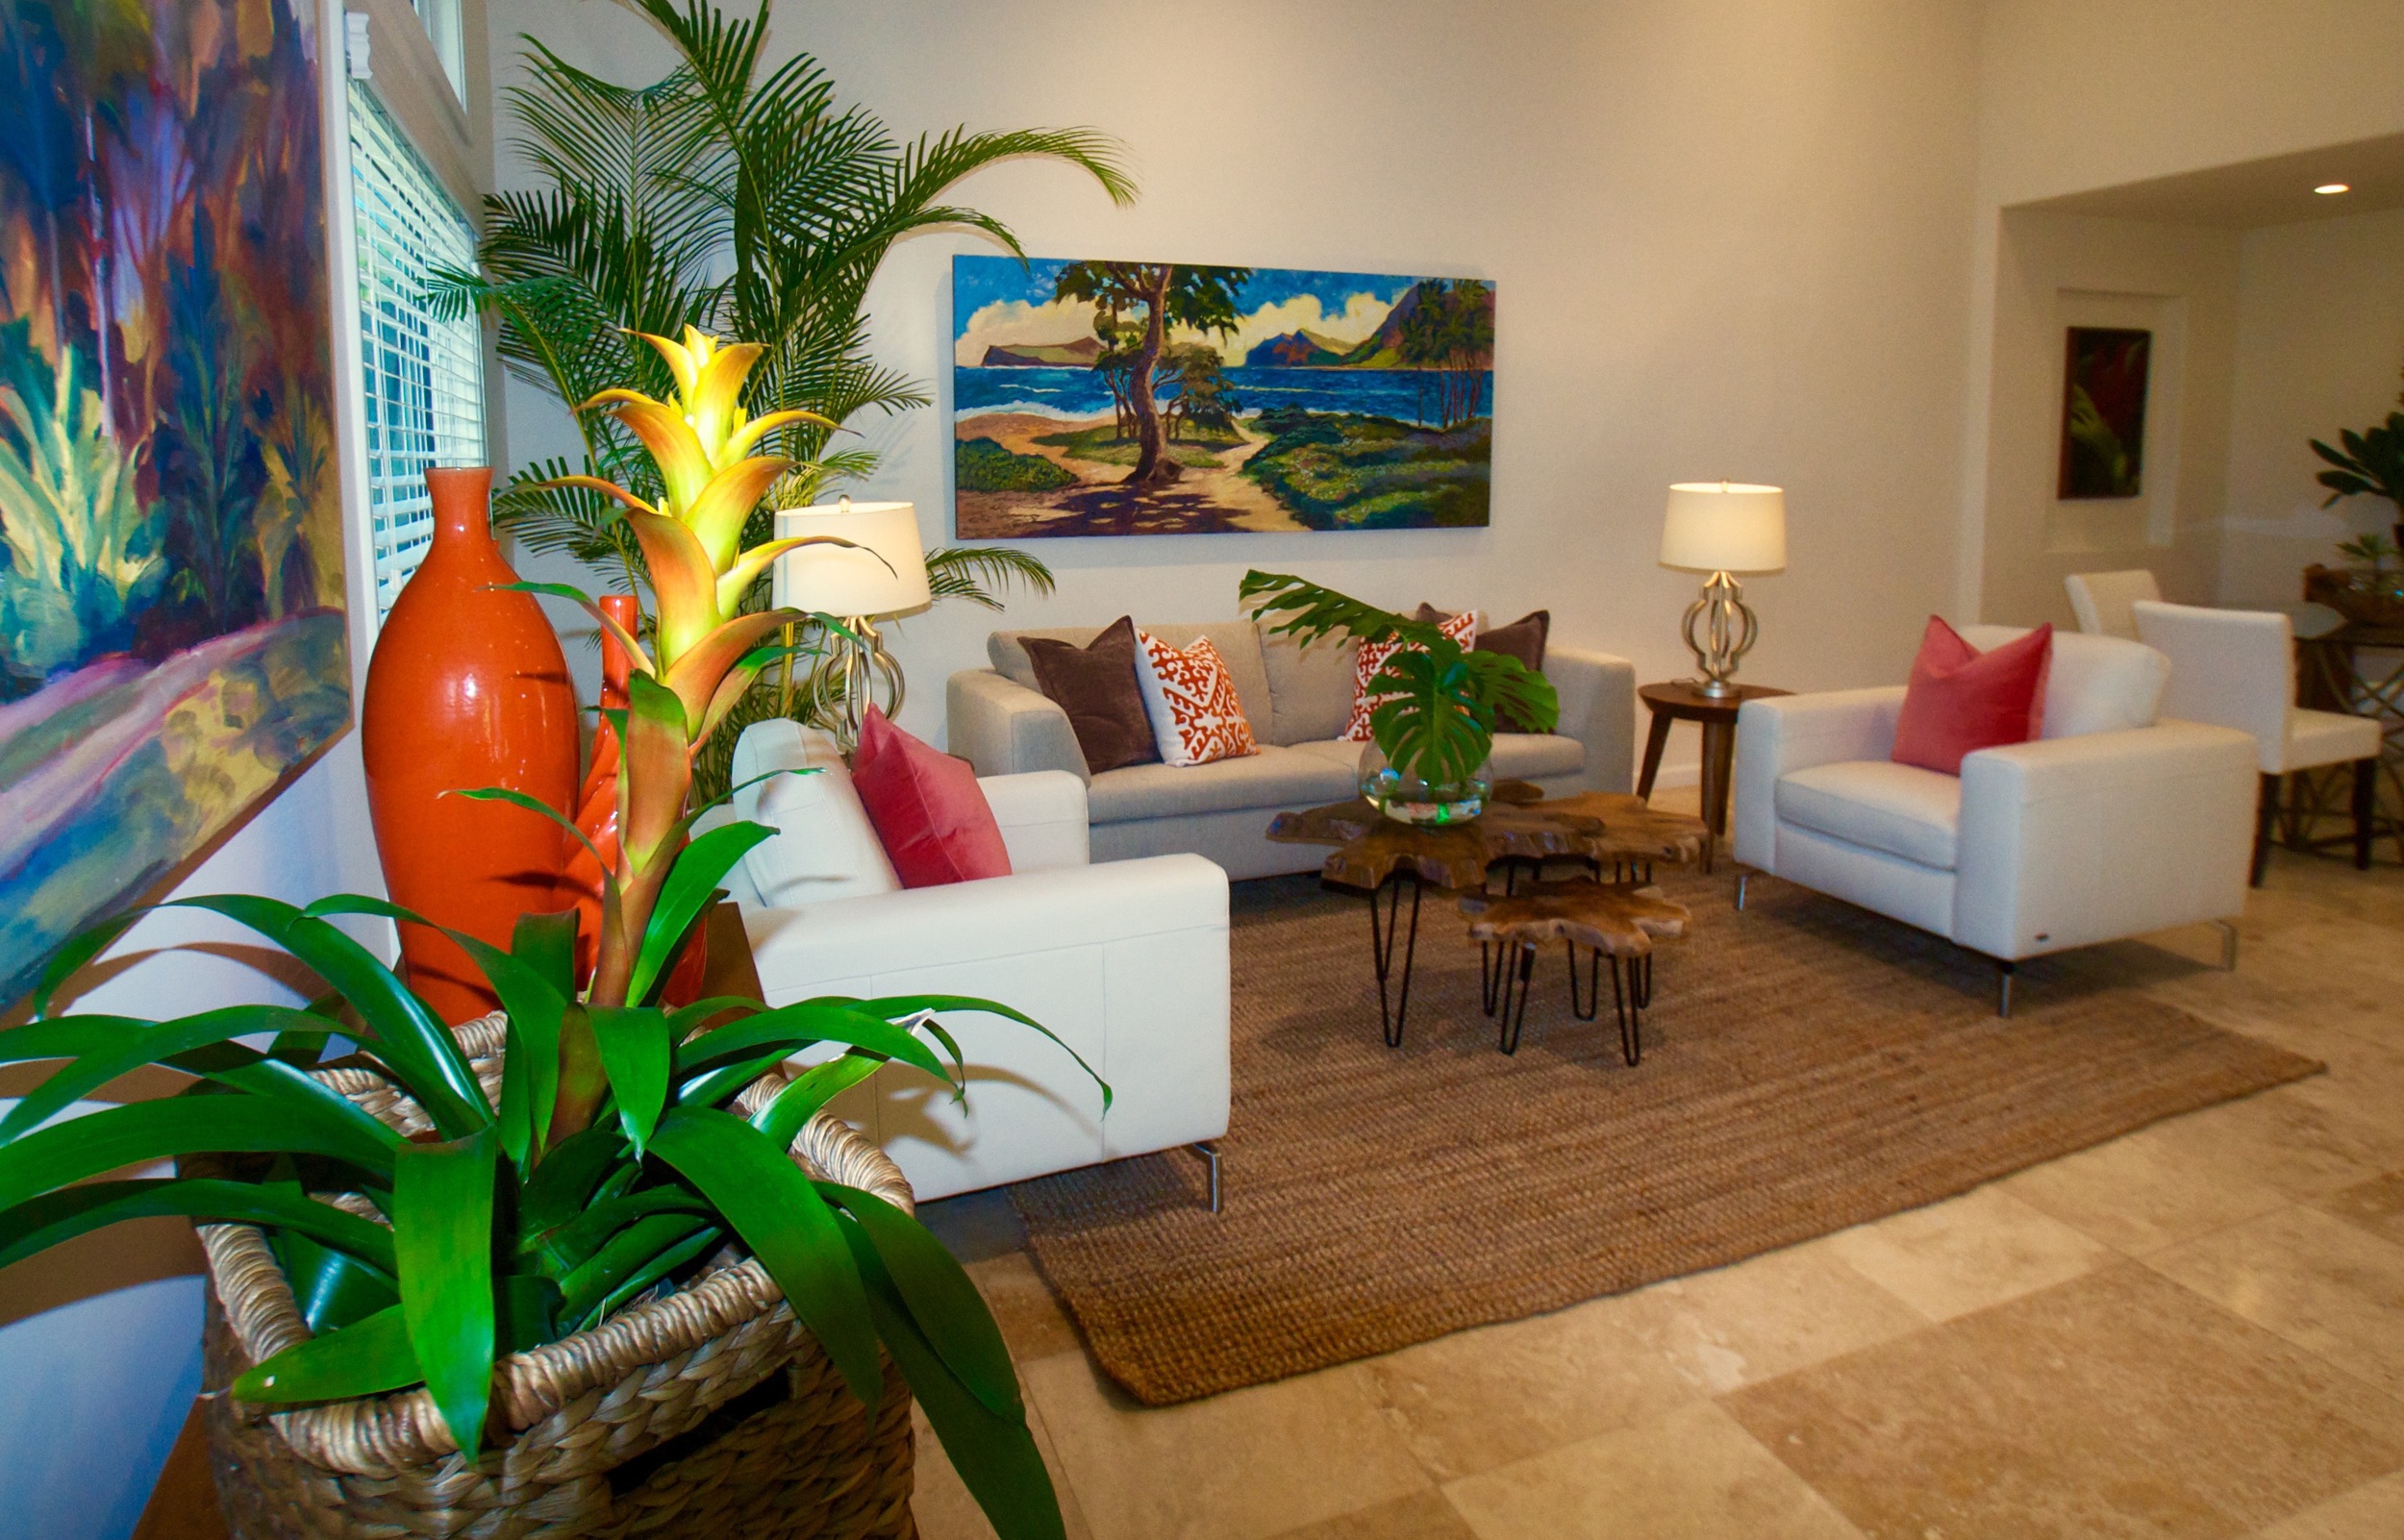  Stagers Hawaii, Home Stager Hawaii, Luxury Home Stager Hawaii, Staging Hawaii, Staging Honolulu, Staging Oahu,Home Staging Service Hawaii,Home Staging Hawaii, Luxury Home Staging Hawaii,&nbsp;Inouye Interiors, Interior Decoration &amp; Luxury Home S